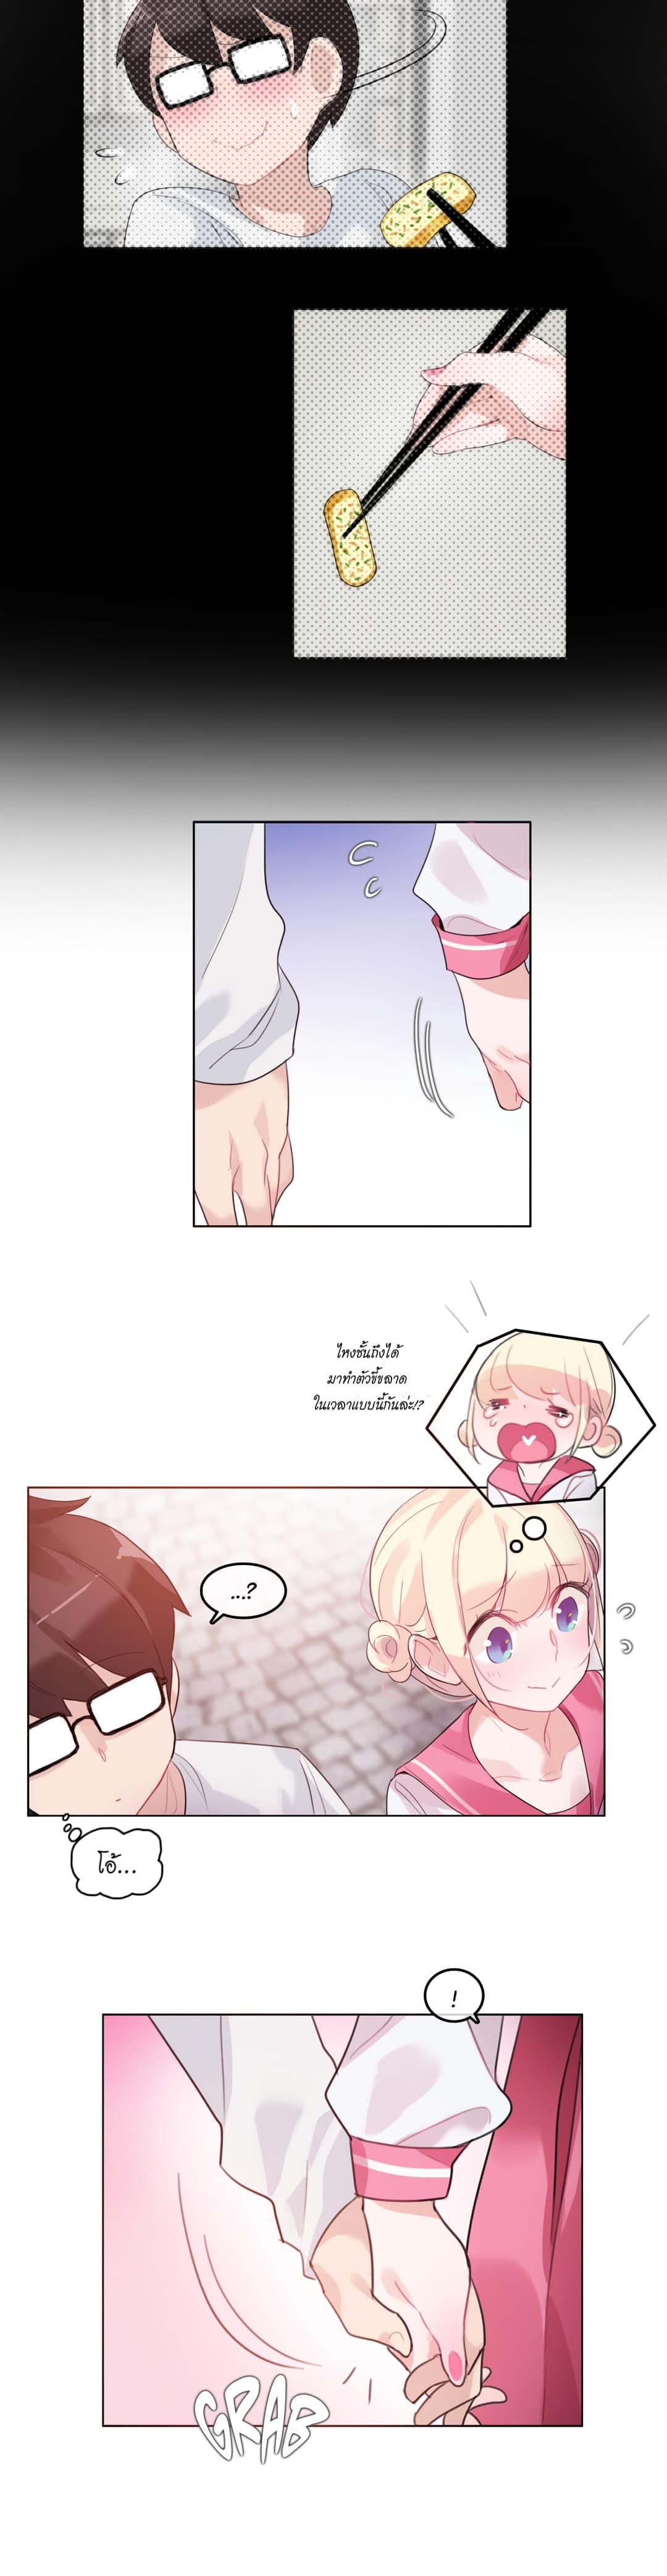 A Pervert’s Daily Life 29 (12)